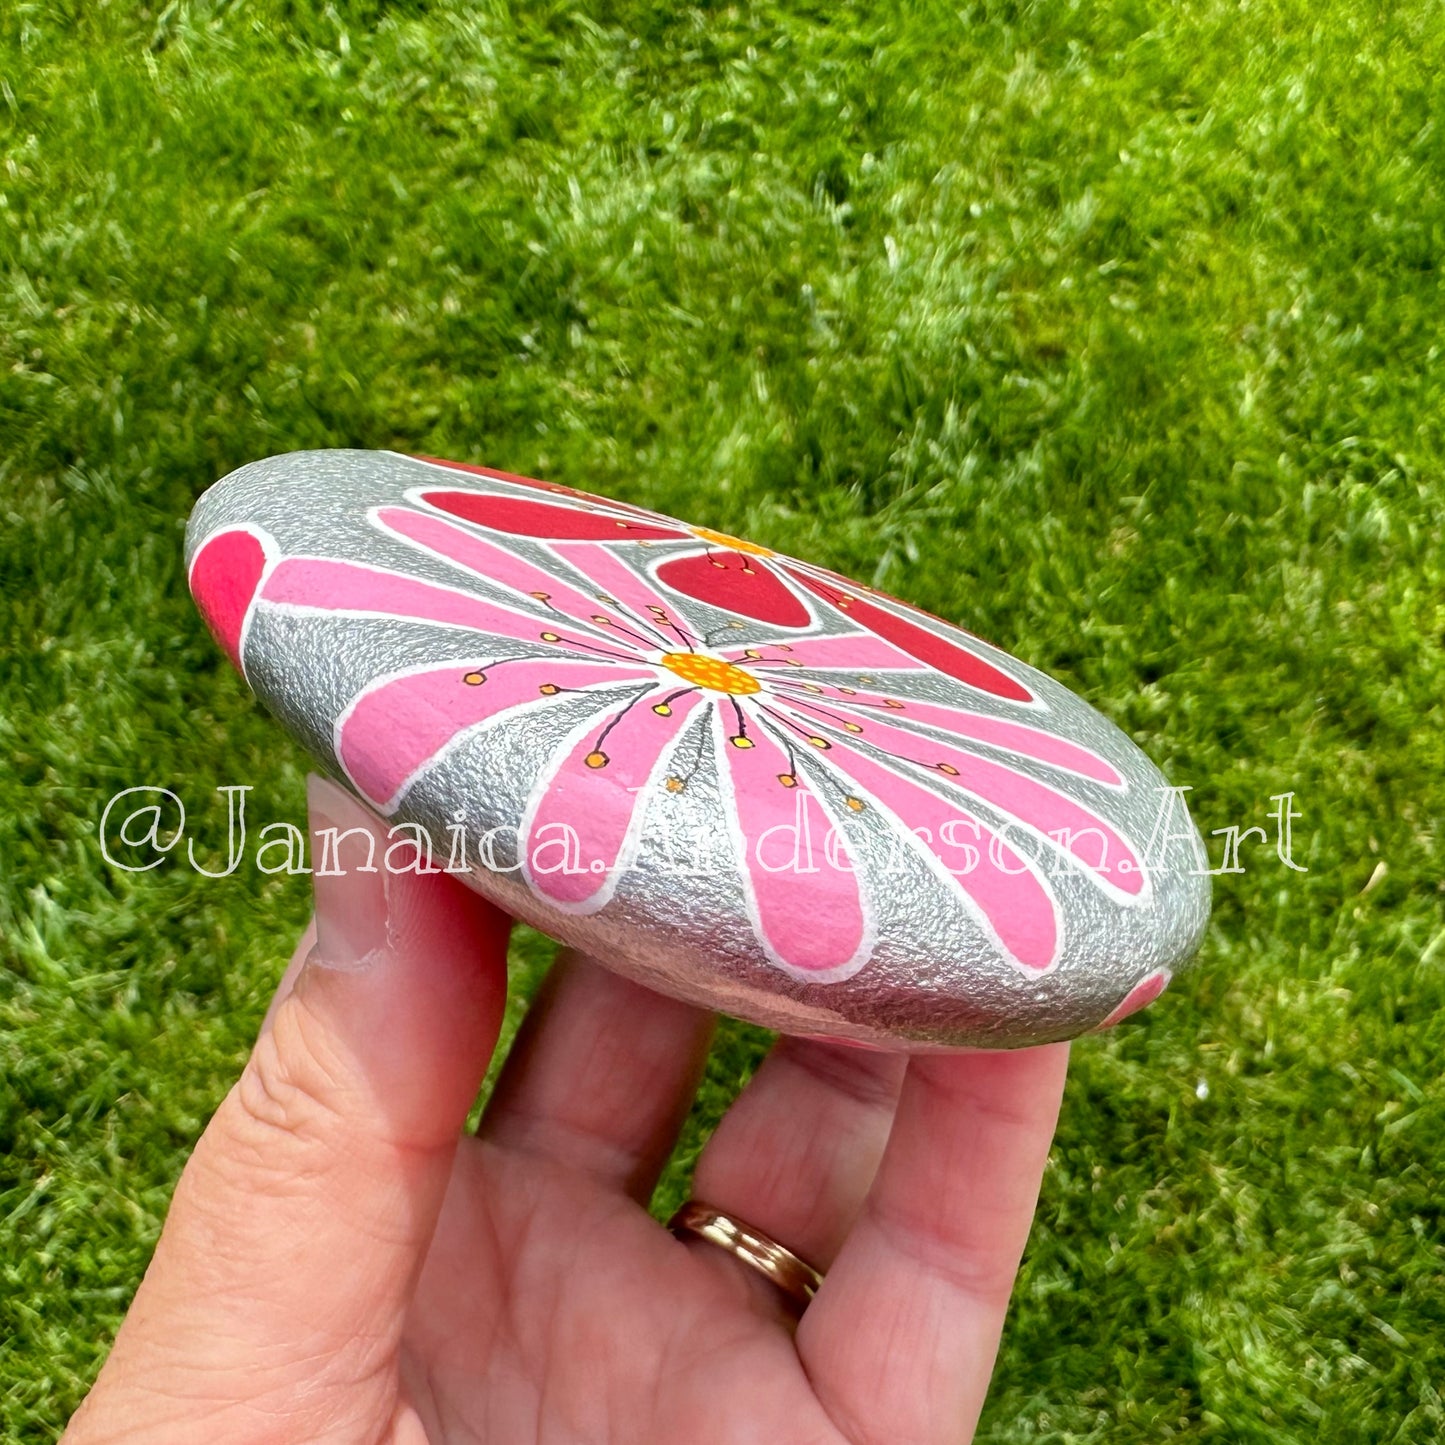 Flower Power No.6 - Hand Painted Stone